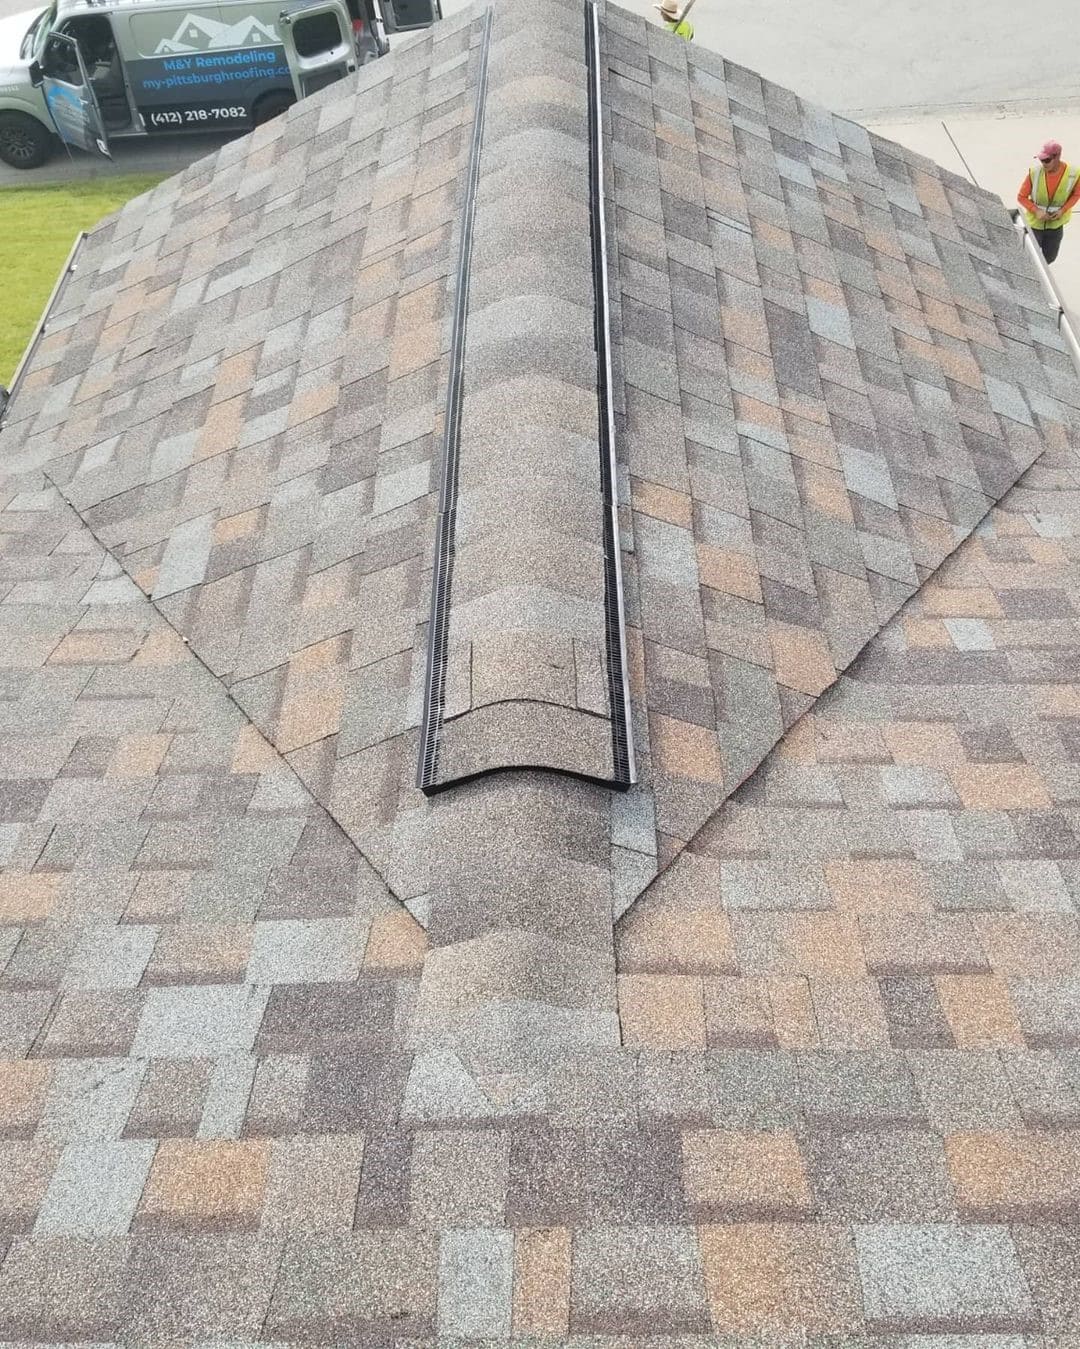 New roof